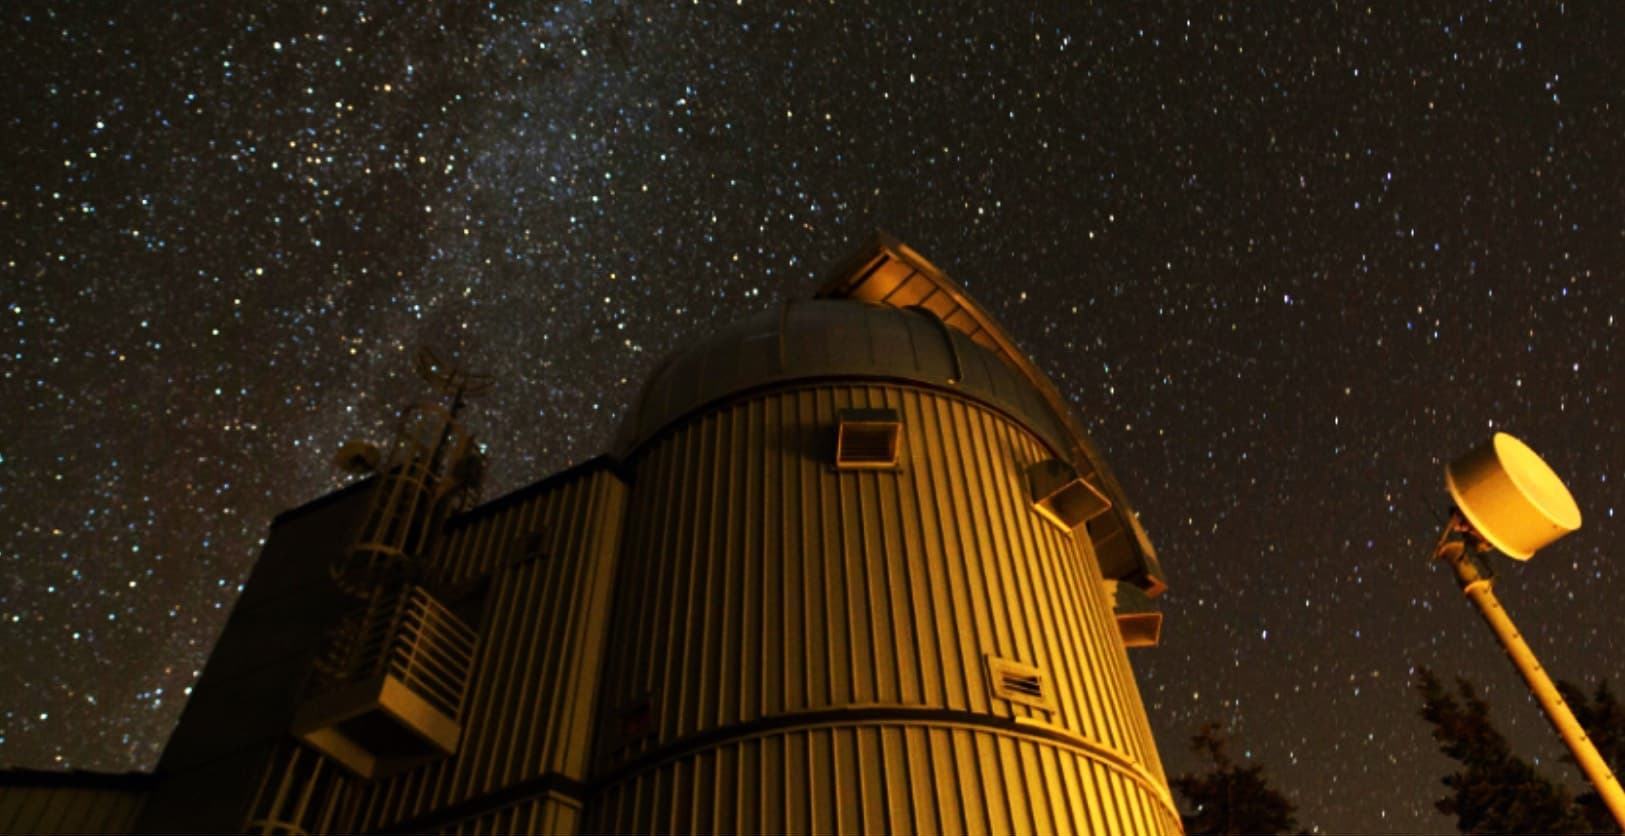 The Vatican Observatory under the stars. Image Credit: the Vatican Observatory.